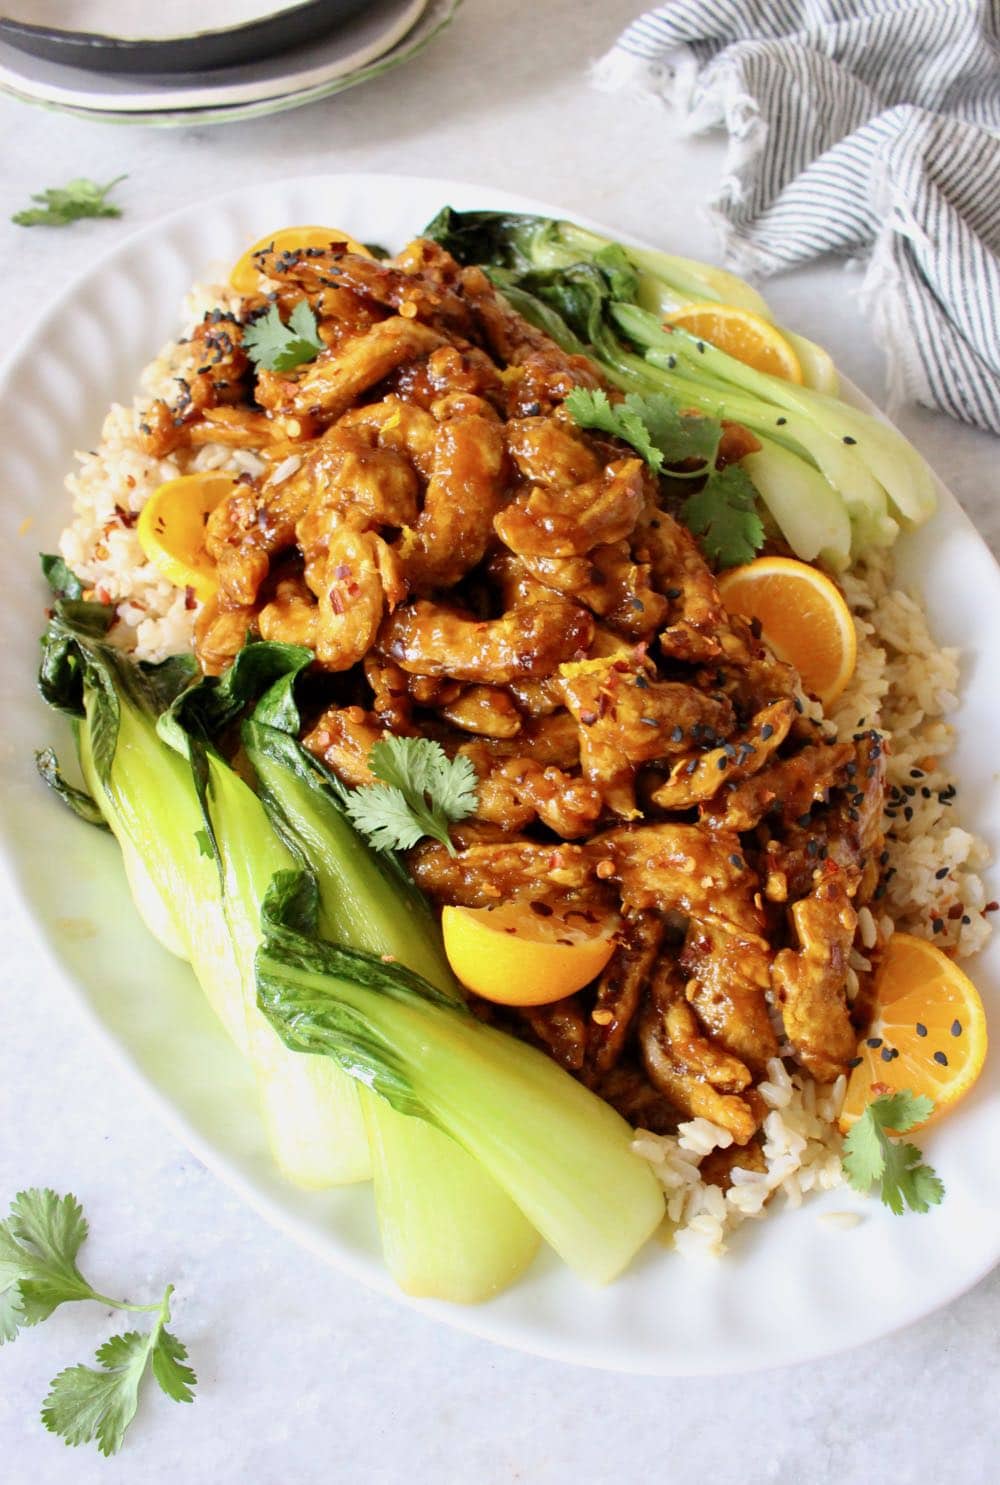 vegan orange chicken with soy curls, rice and bok choy